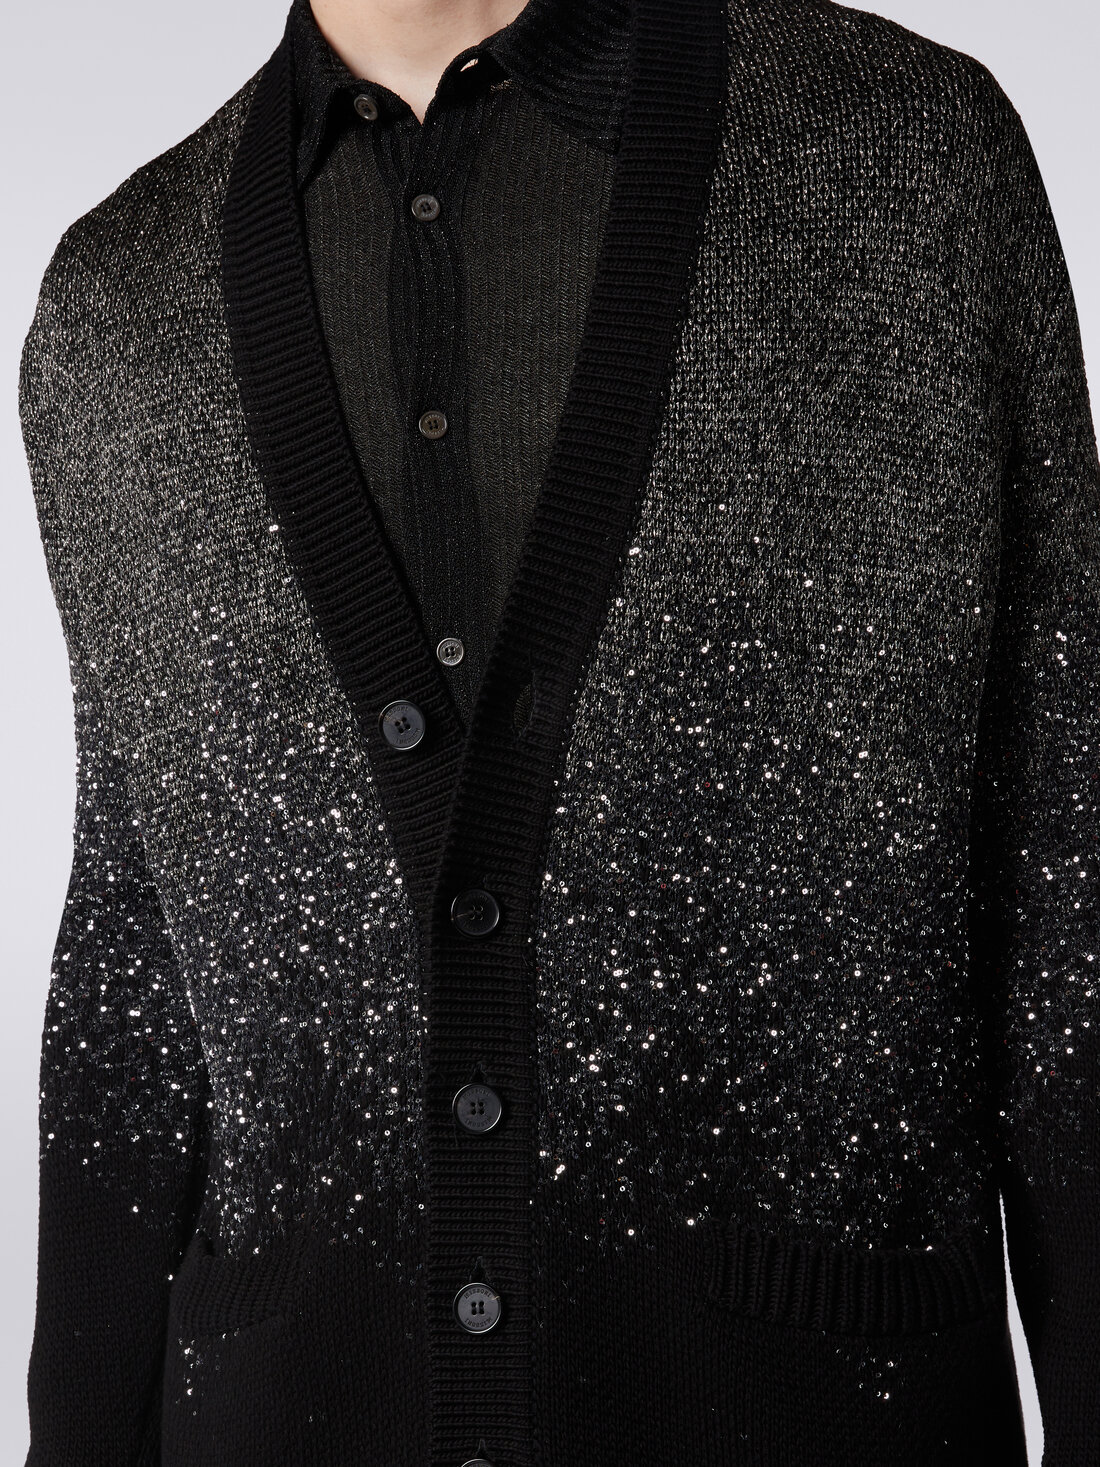 Cardigan in cotton blend with lurex and sequins, Black    - US24SM0EBK034MS91J5 - 4